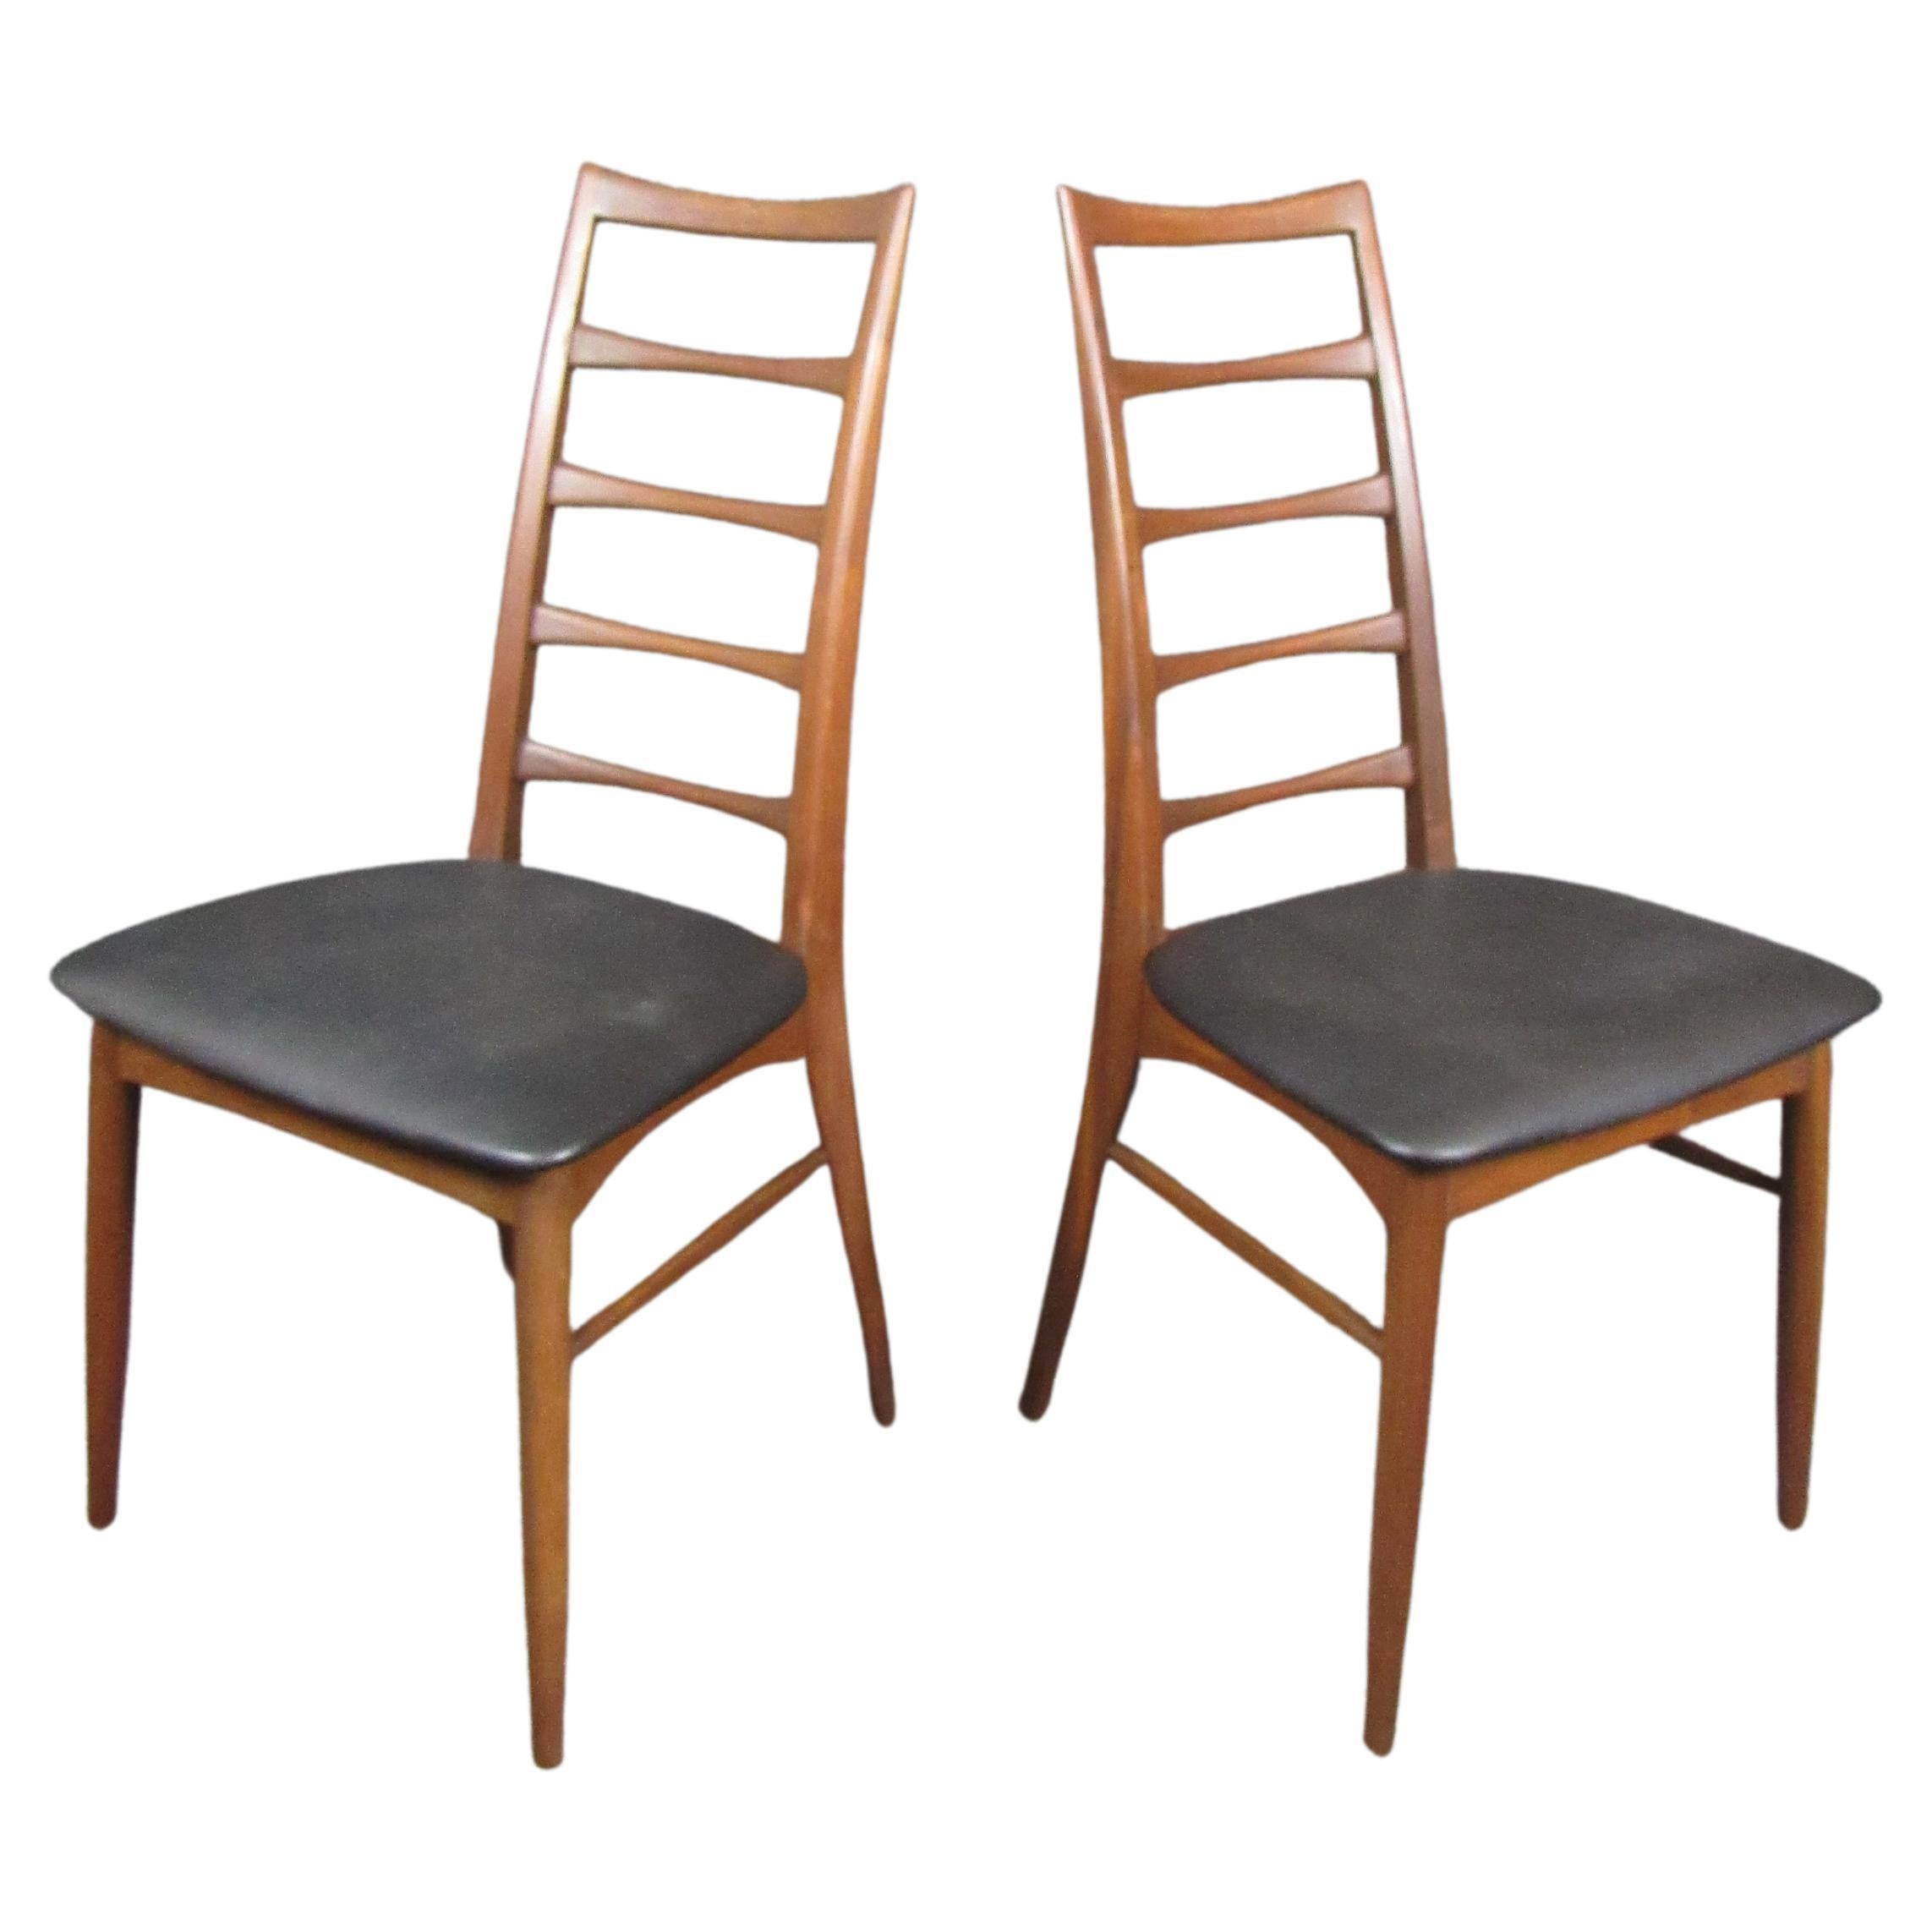 Pair of 6 Niels Kofoed Dining Chairs. Teak wood ladder back chairs with matte black leather cushion. These Kofoed style chairs are unmatched when it comes to Danish mid century. The set would pair beautifully with a teak dining table.
Please